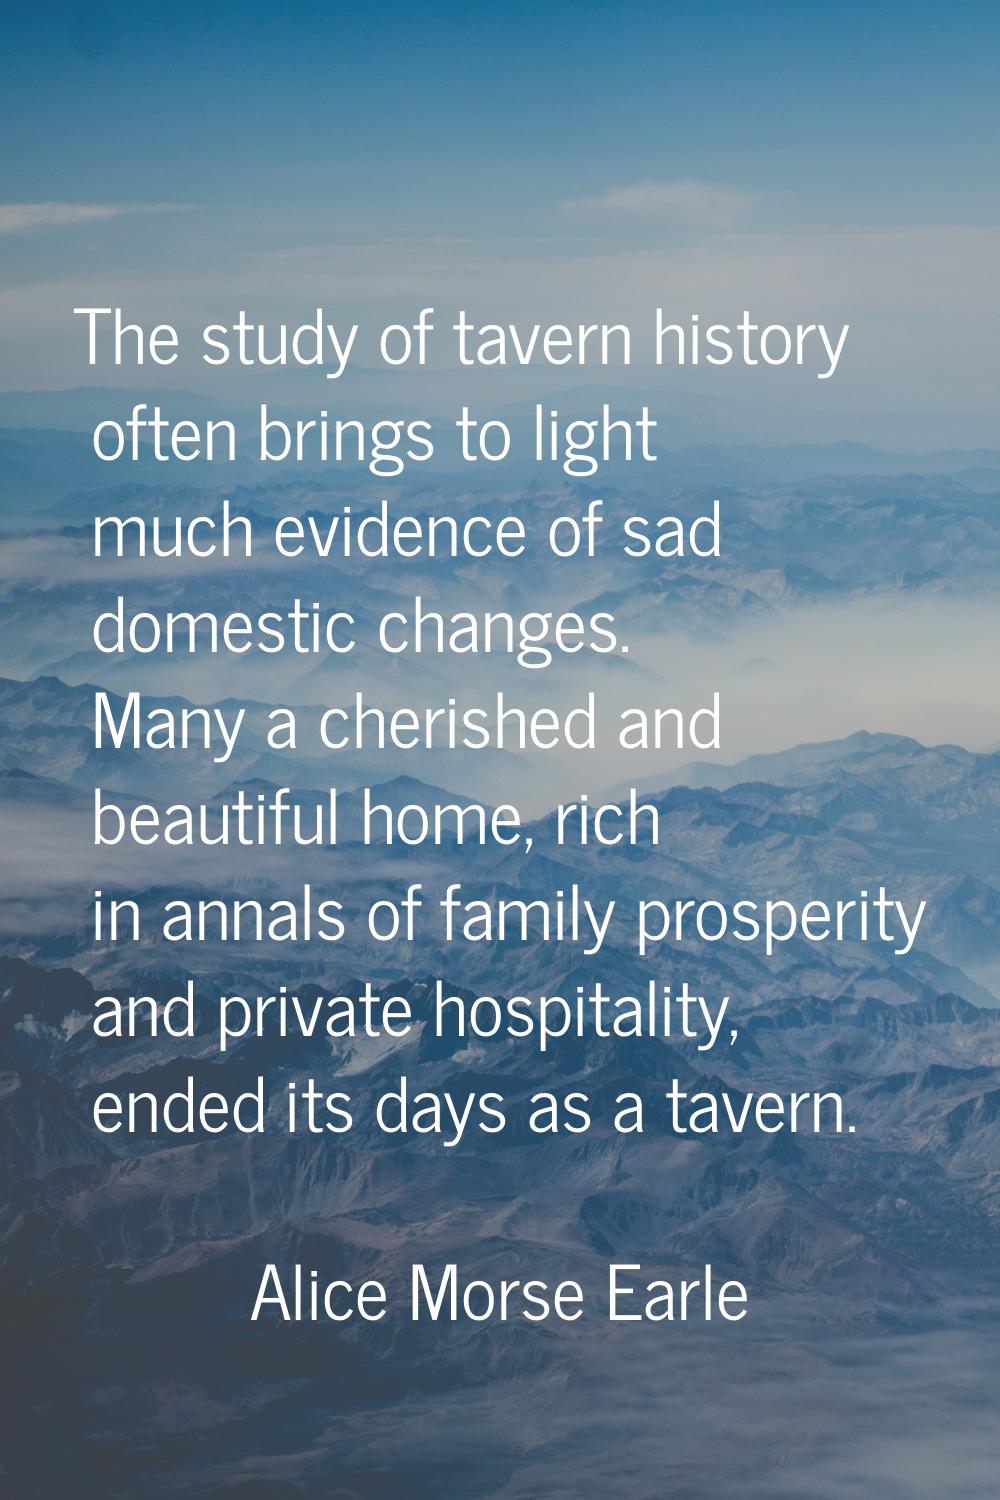 The study of tavern history often brings to light much evidence of sad domestic changes. Many a che